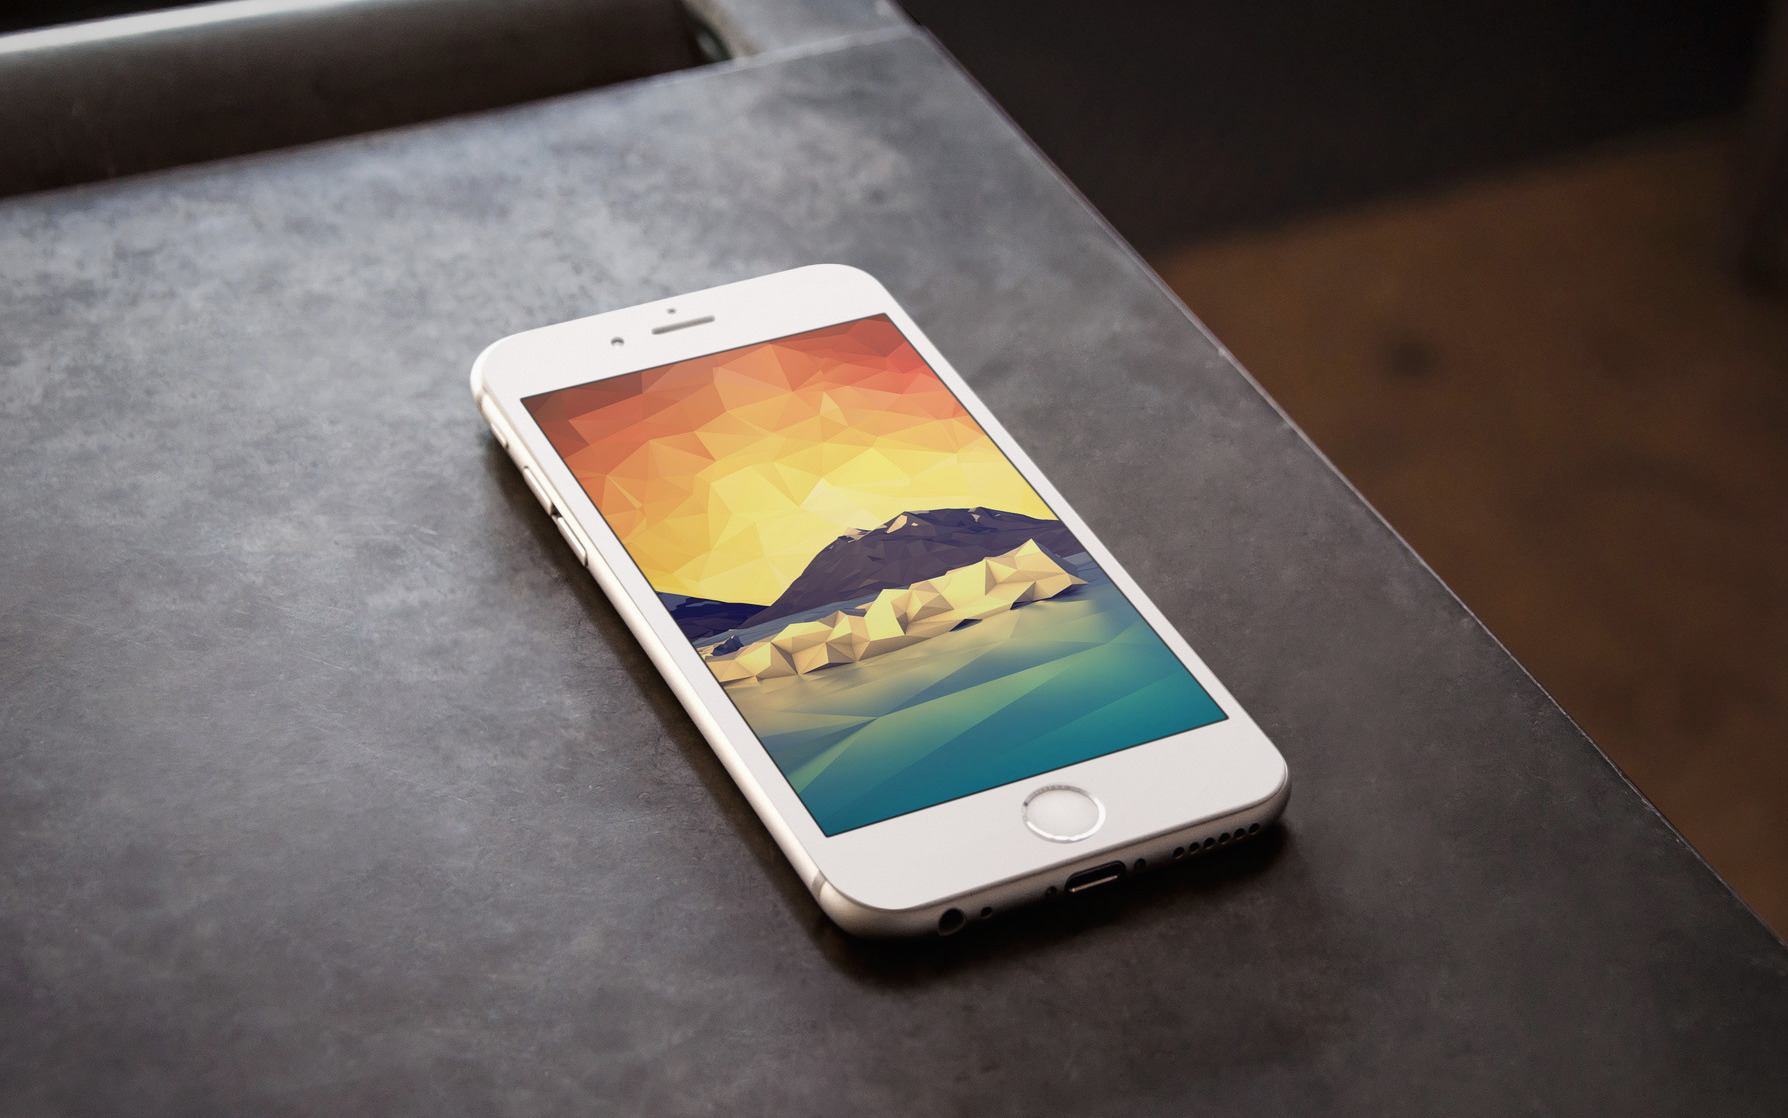 A beautiful collection of geometric wallpapers for iPhone